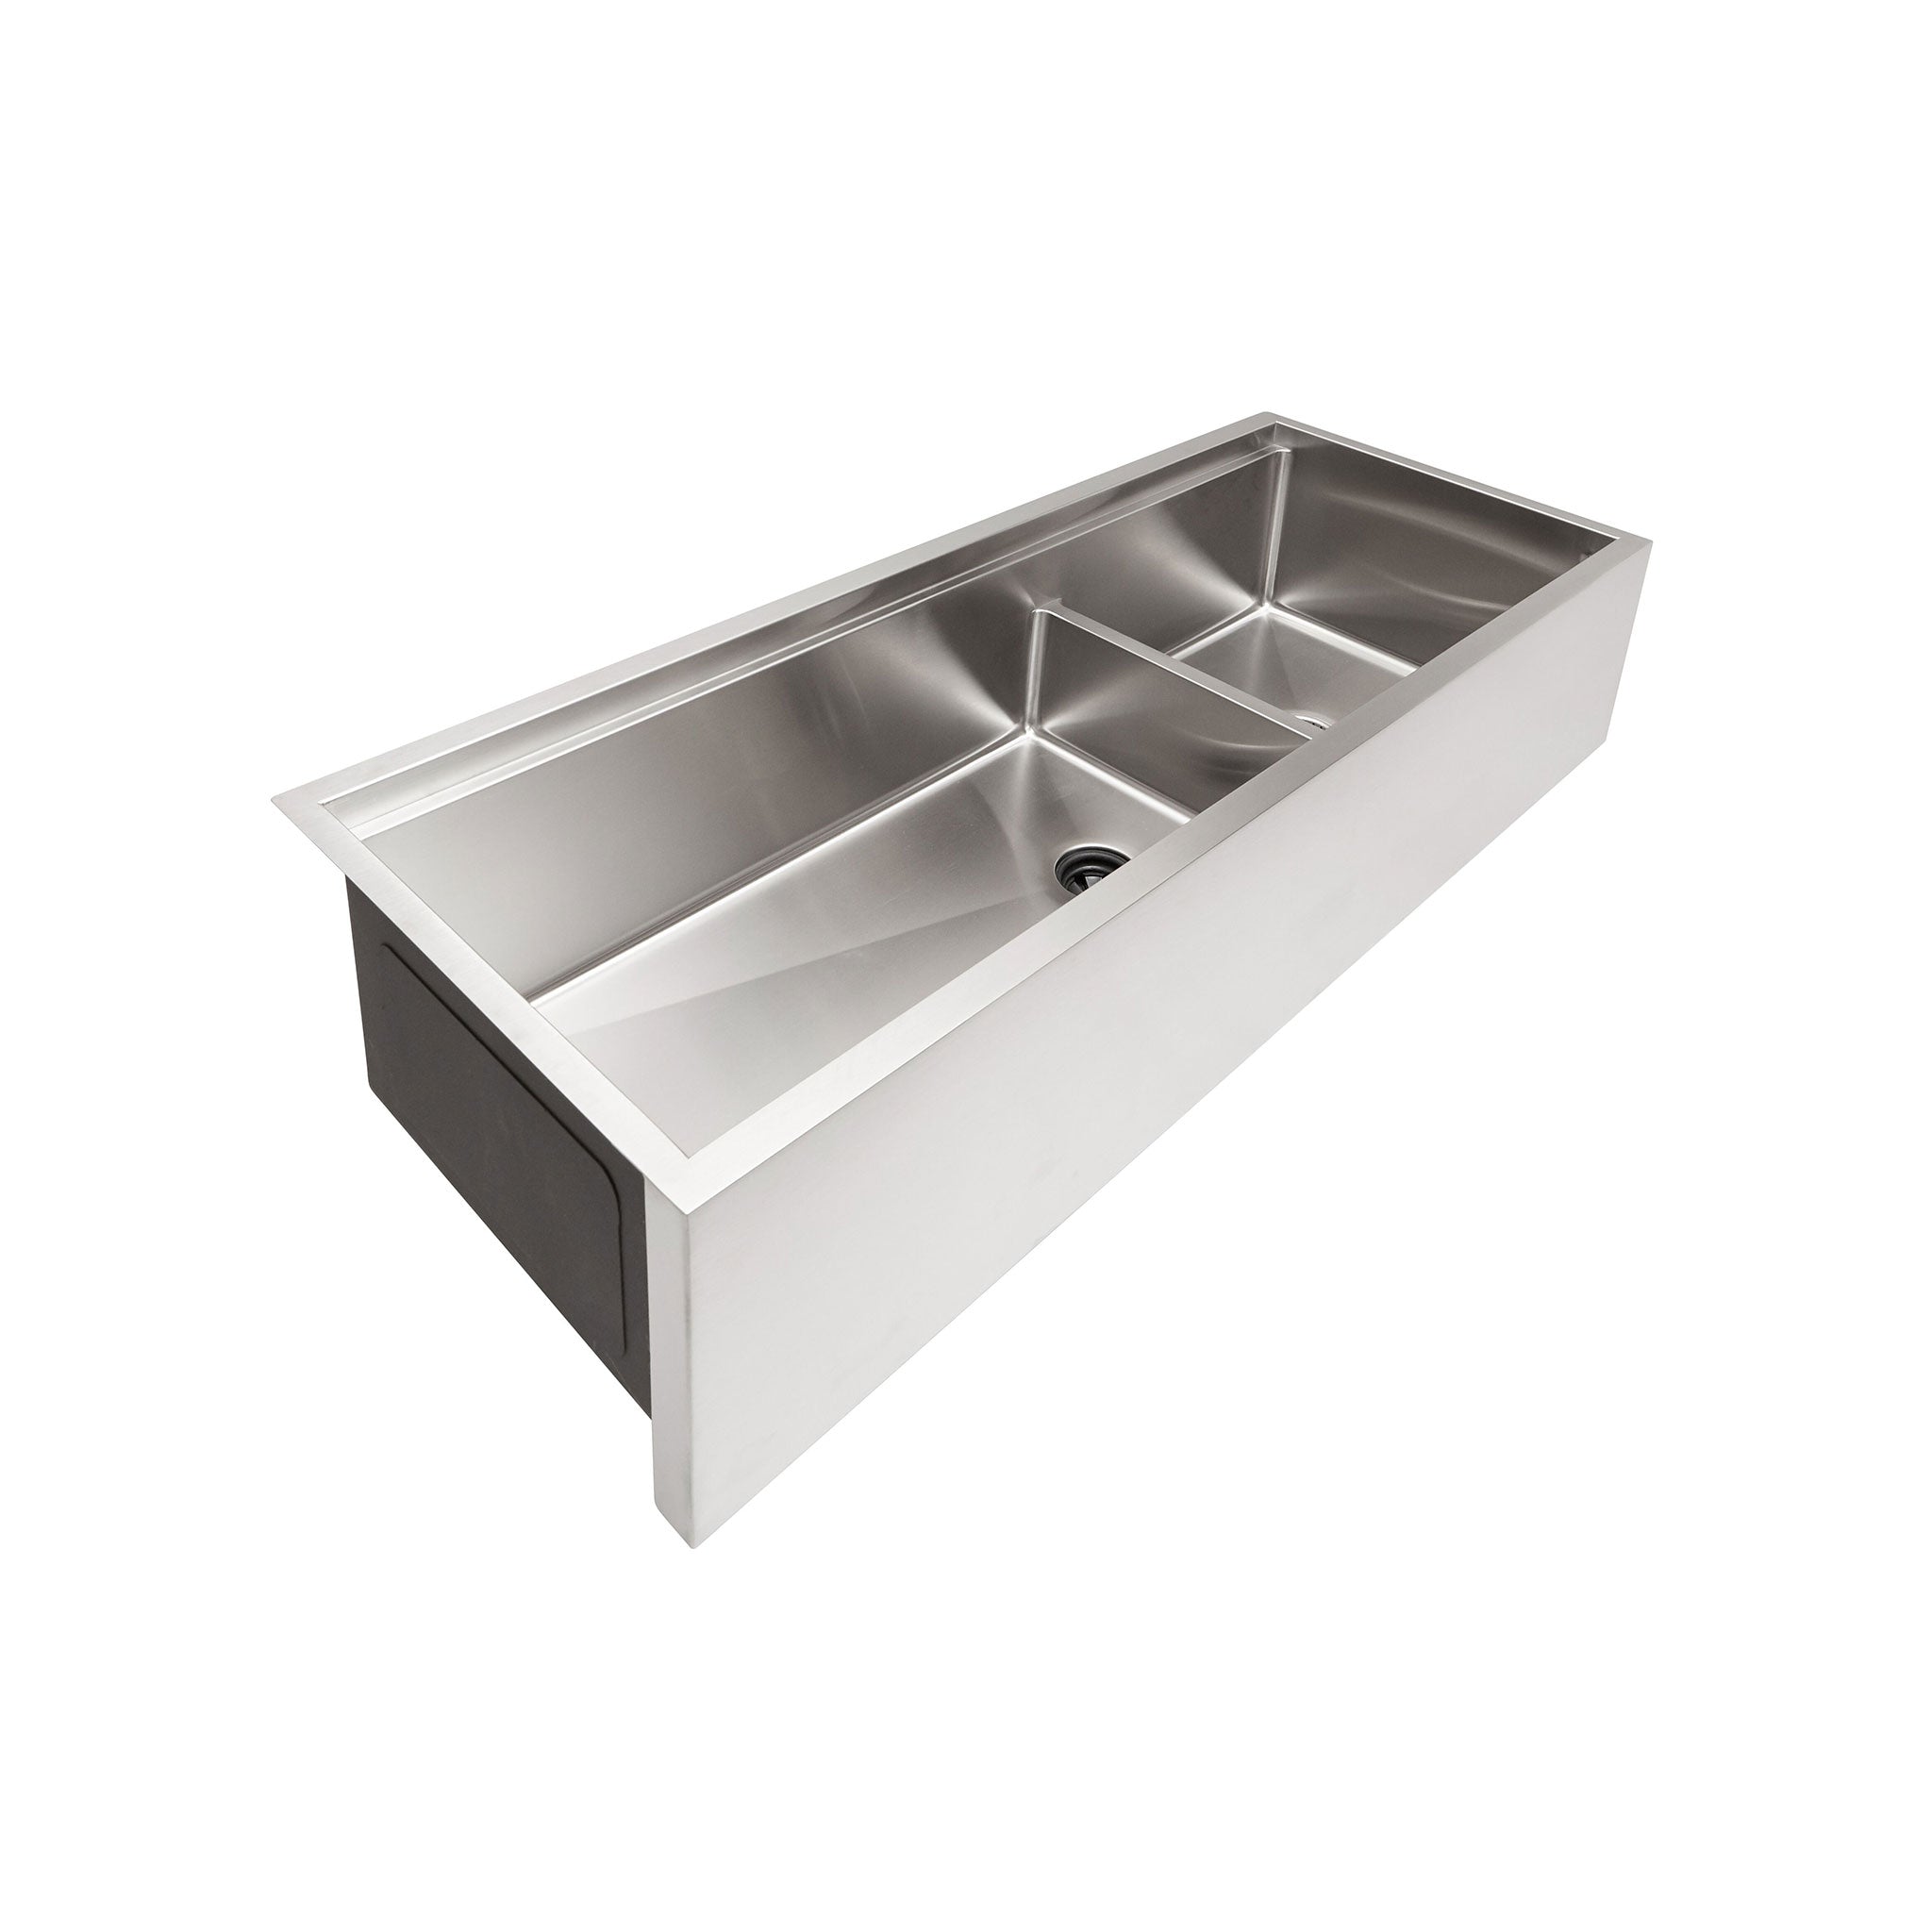 50 Inch Dual Basin Farmhouse Stainless Steel Kitchen Sink